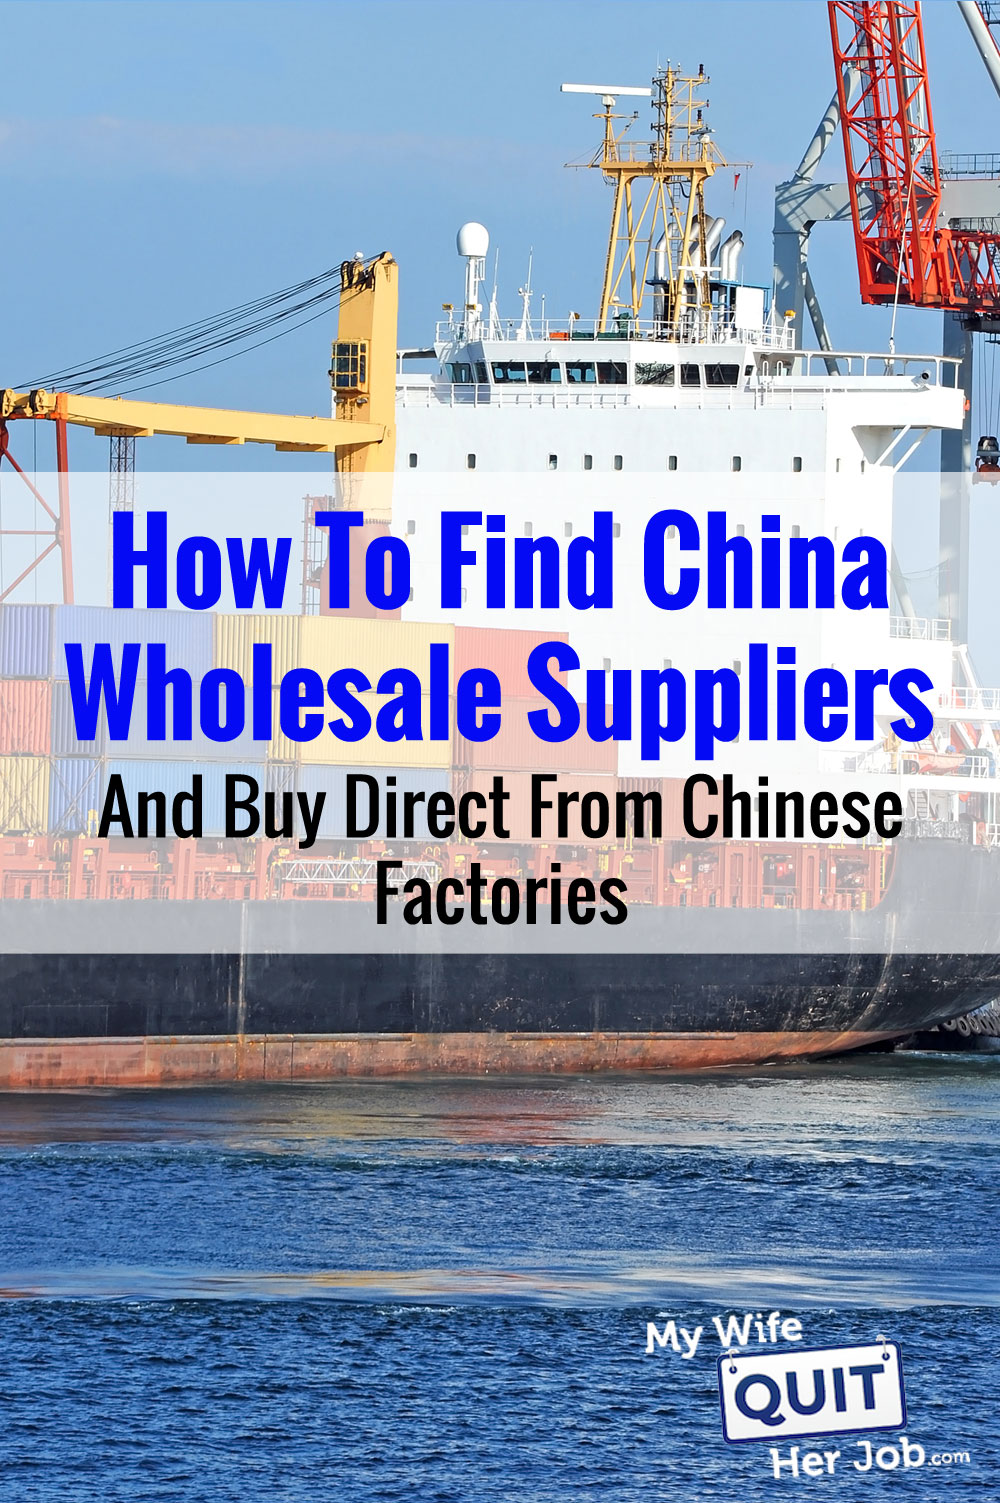 How To Find China Wholesale Suppliers And Import Direct From Chinese Factories